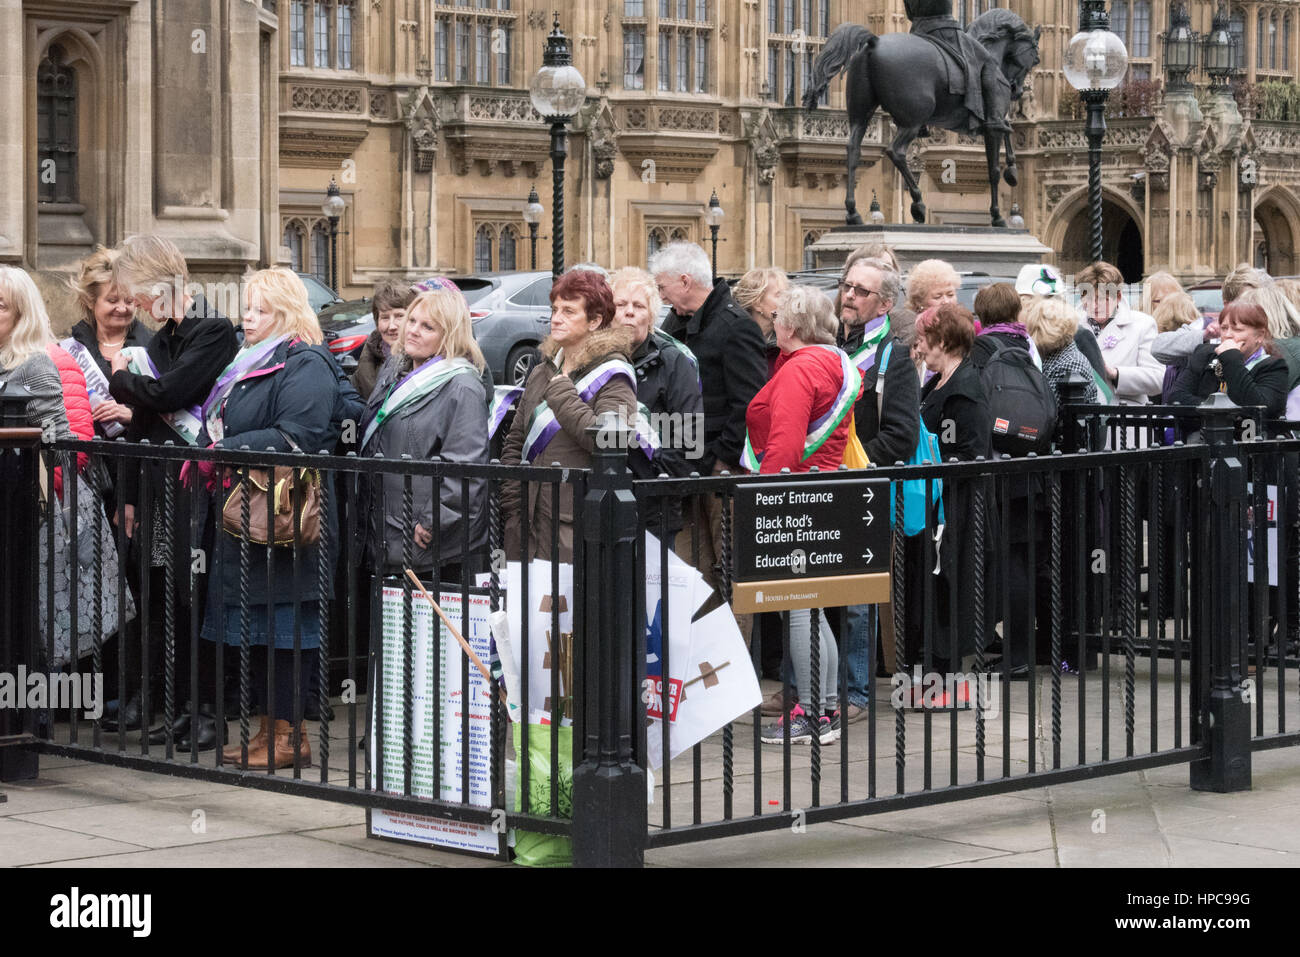 London, UK. 21st February 2017. A lobby of Parliment by the Women against State Pension Inequalty to protest at changes in state retirement age for women Credit: Ian Davidson/Alamy Live News Stock Photo